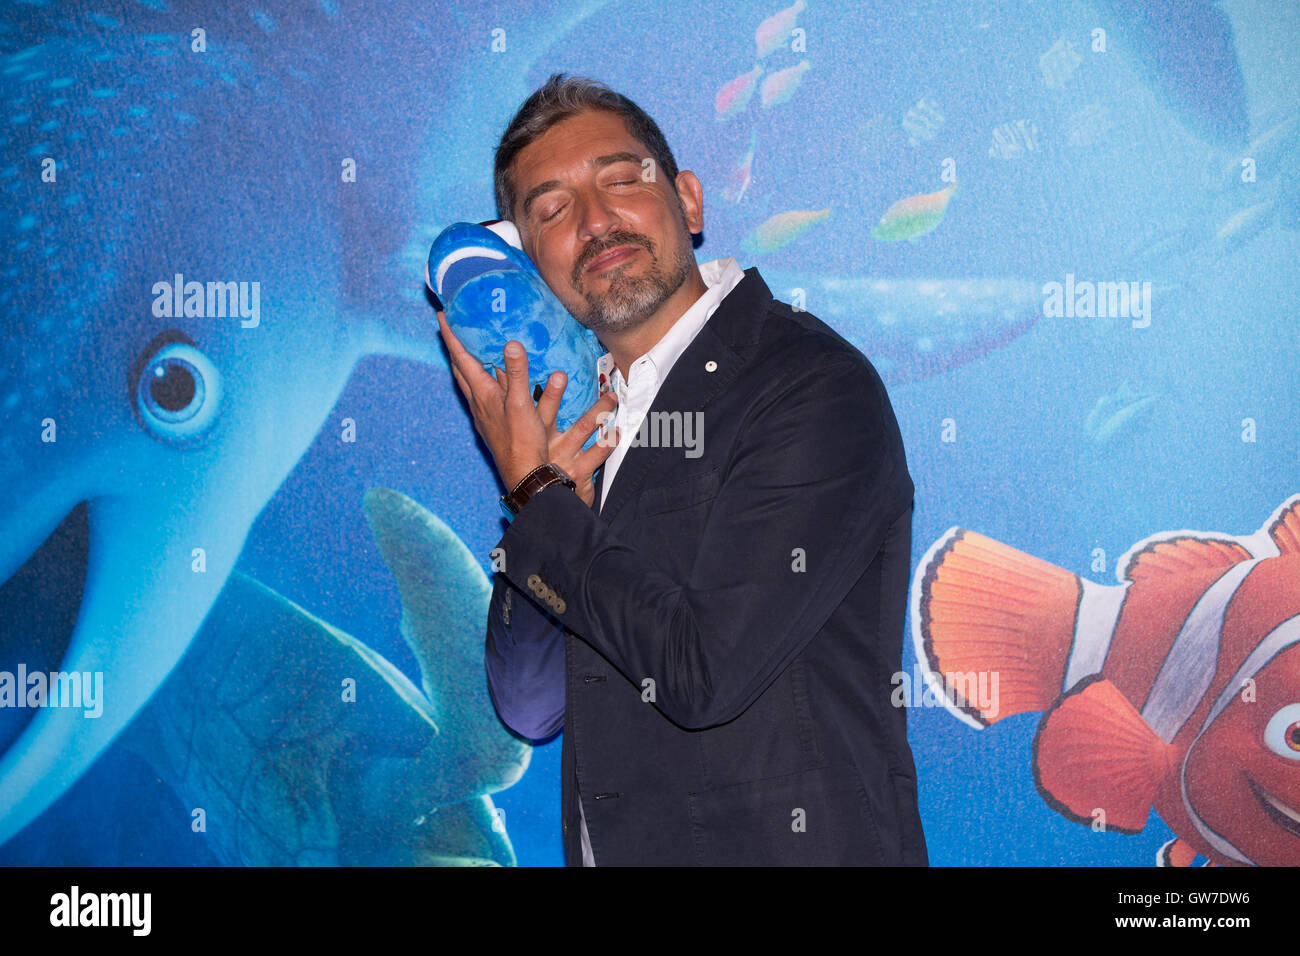 The italian preview of the film 'Finding Dory' at Auditorium Conciliazione in Roma Stock Photo